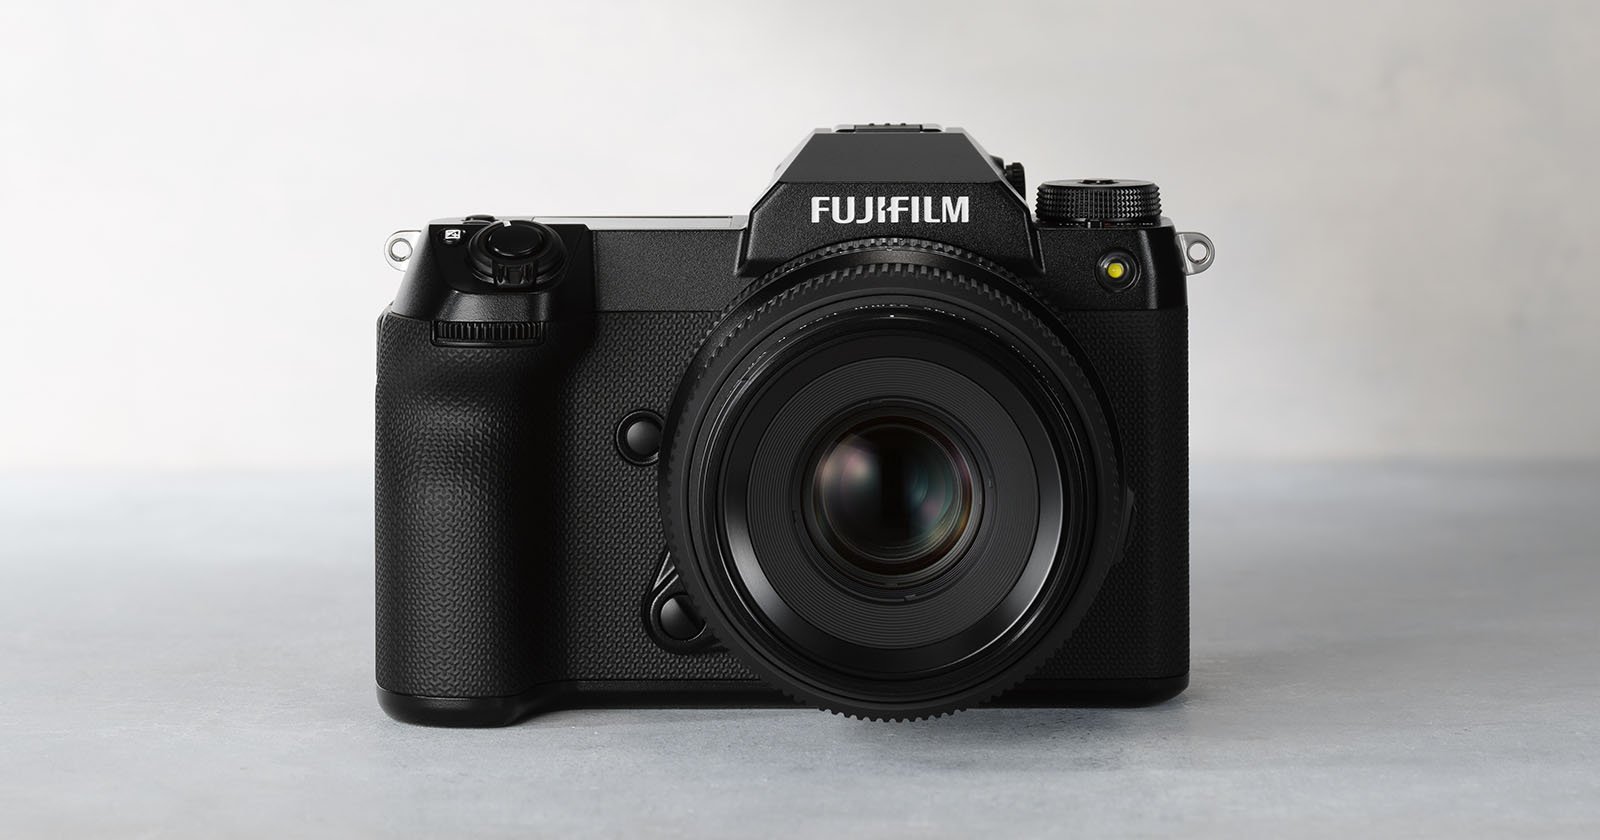 Front view of a black Fujifilm professional digital camera placed on a light gray surface. The camera features a prominent lens and detailed buttons on the left side of its body. The brand name "Fujifilm" is clearly visible on the top of the camera.